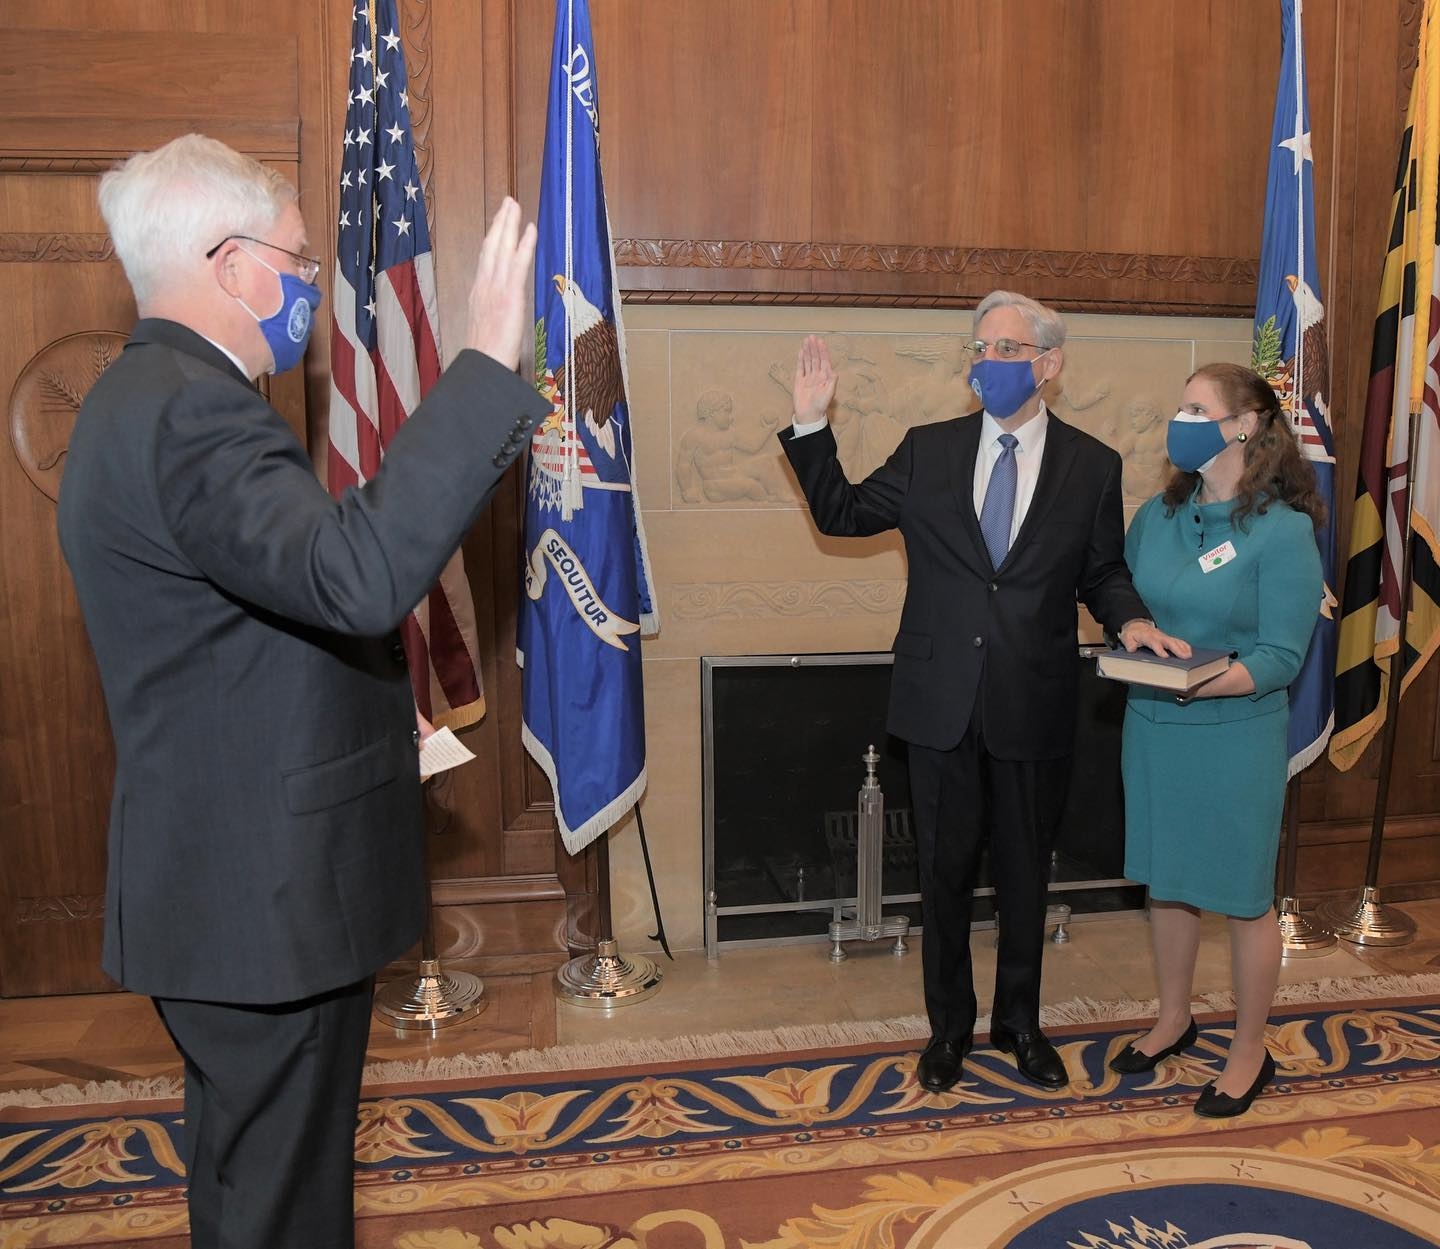 Judge Garland takes his oath of office as the 86th Attorney General of the United States as he is sworn in by Assistant Attorney General for Administration Lee Lofthus.